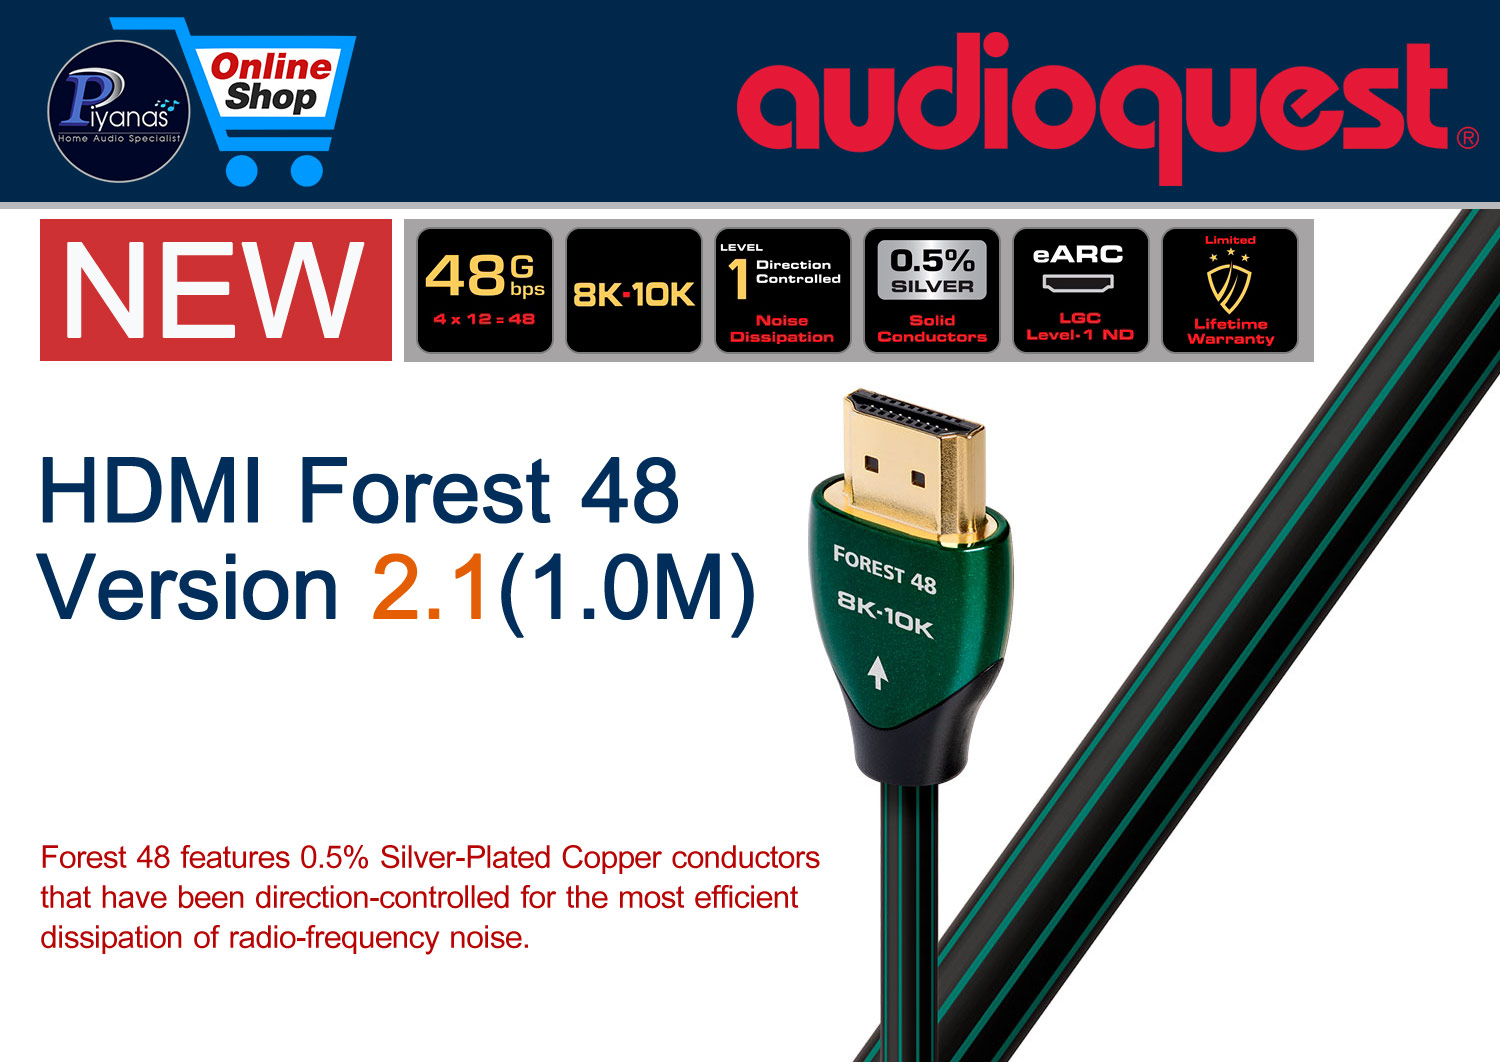 HDMI-Forest 48 (1.0M)